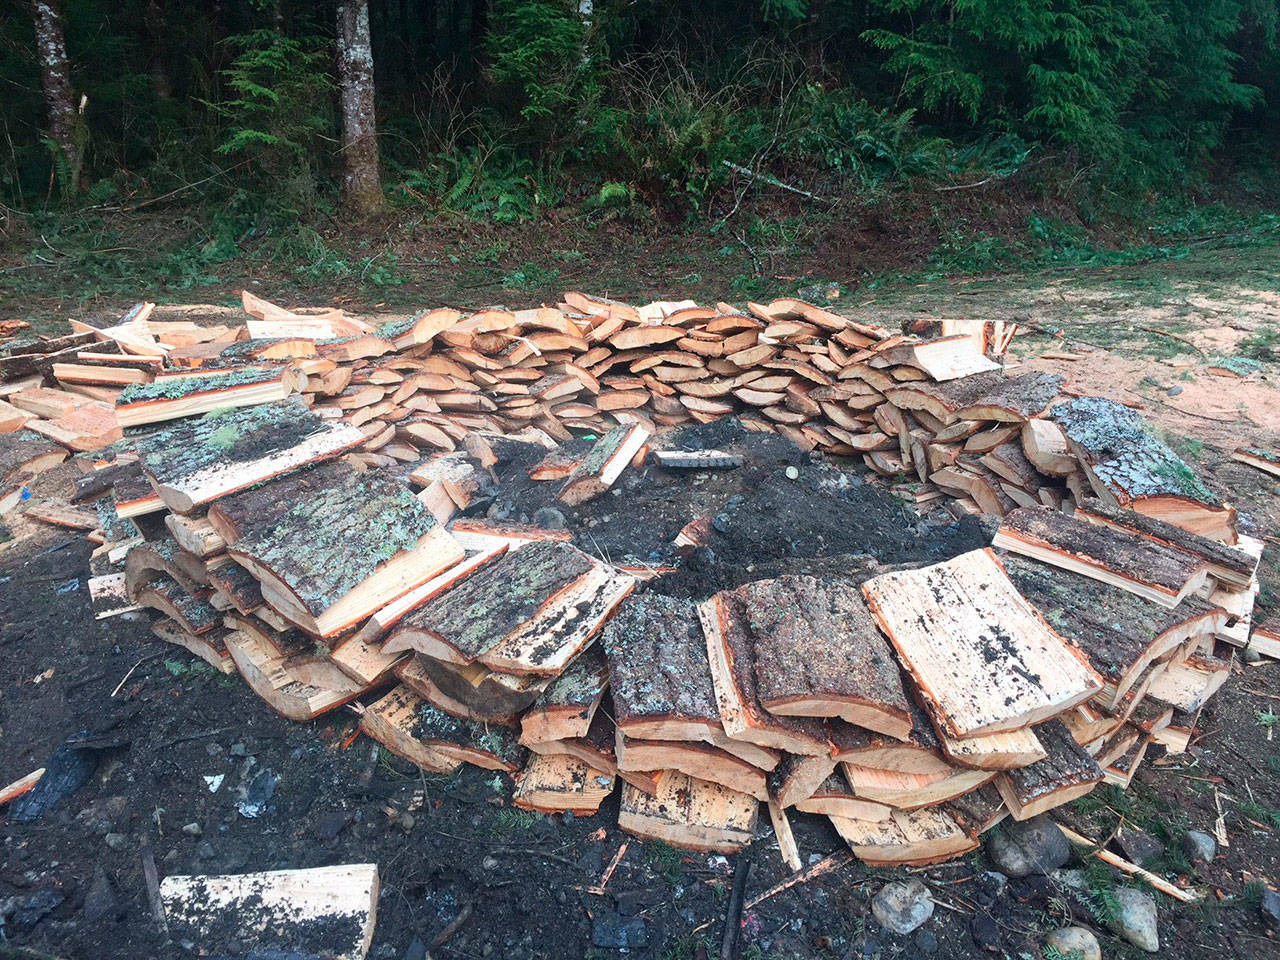 Firewood harvested illegally on state land sits ready for loading. Two men were caught cutting 18 trees by a Washington State Department of Natural Resources officer. (Washington State Department of Natural Resources)